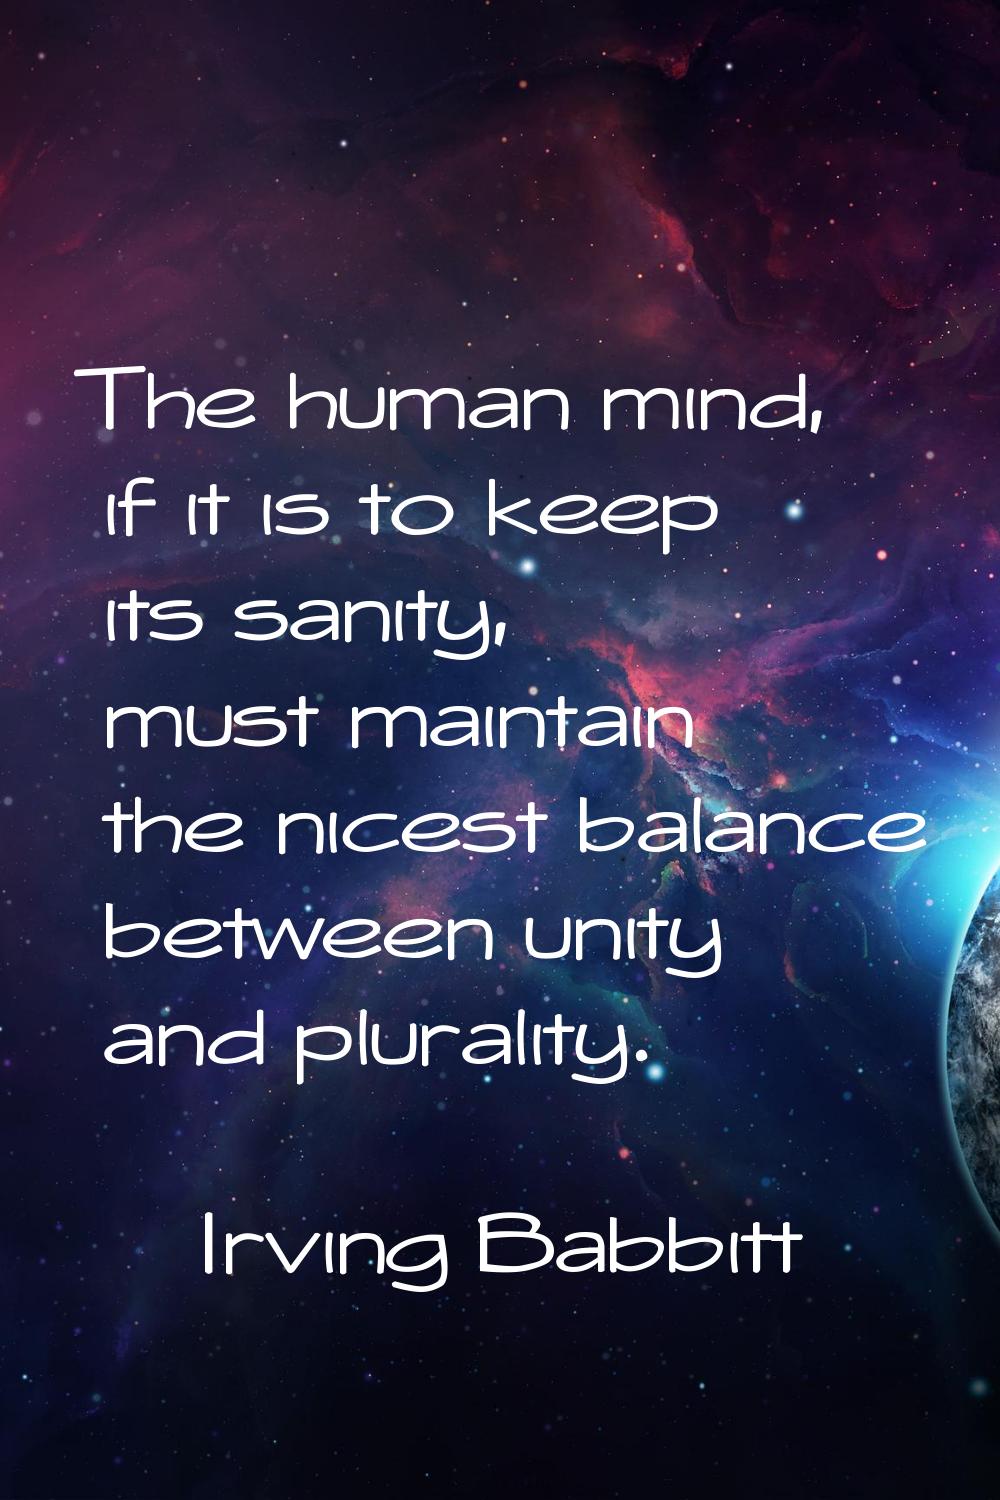 The human mind, if it is to keep its sanity, must maintain the nicest balance between unity and plu